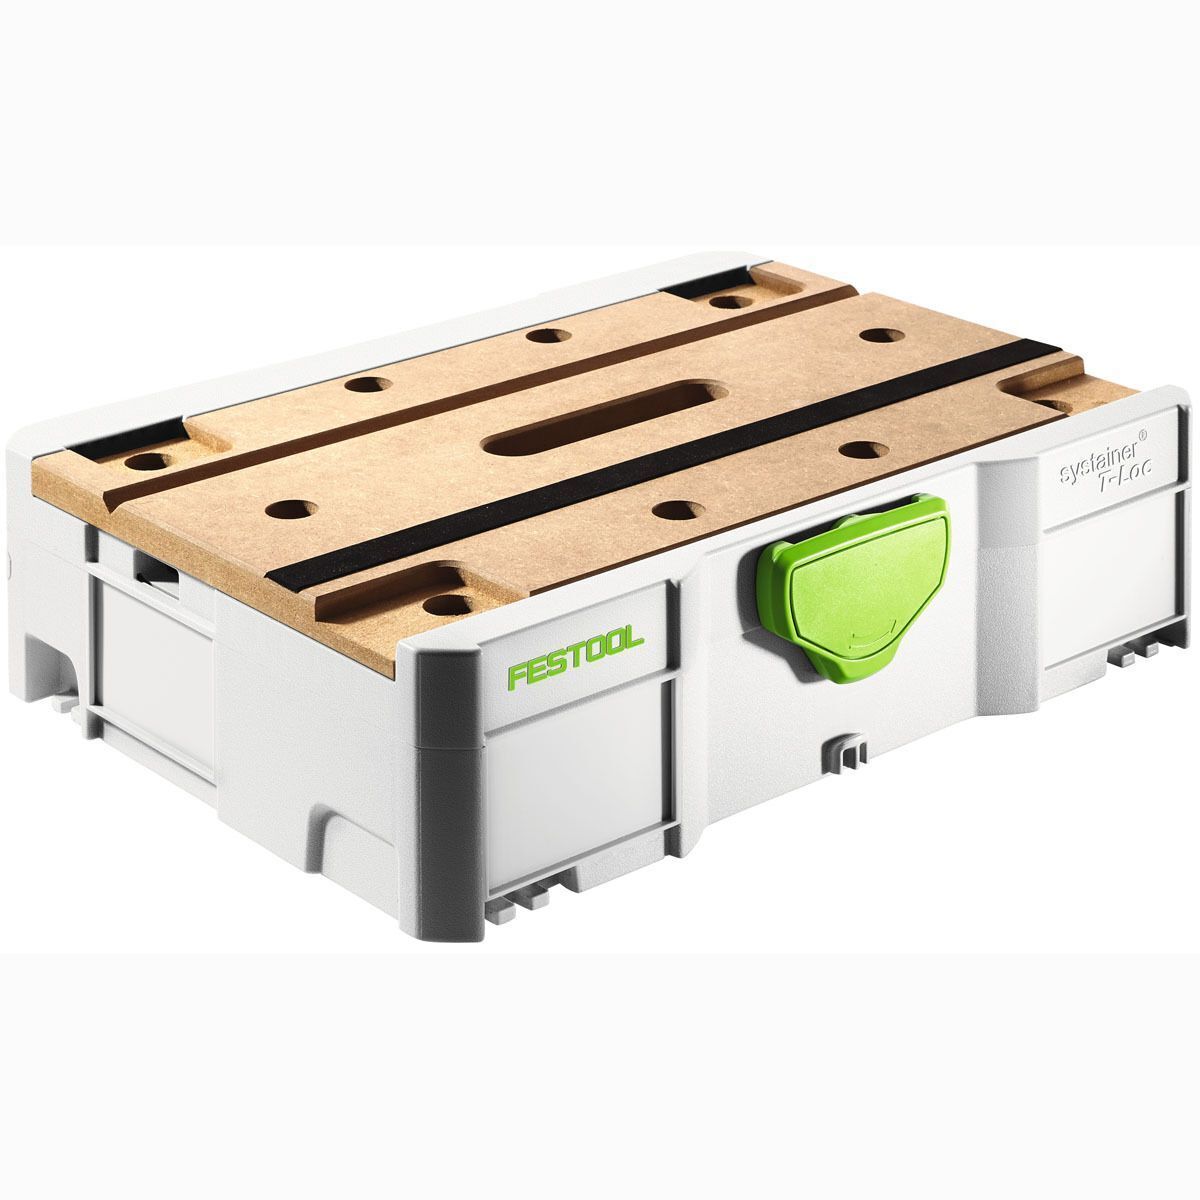 Festool Systainer SYS 1 T-Loc with MFT Timber Lid (500076)